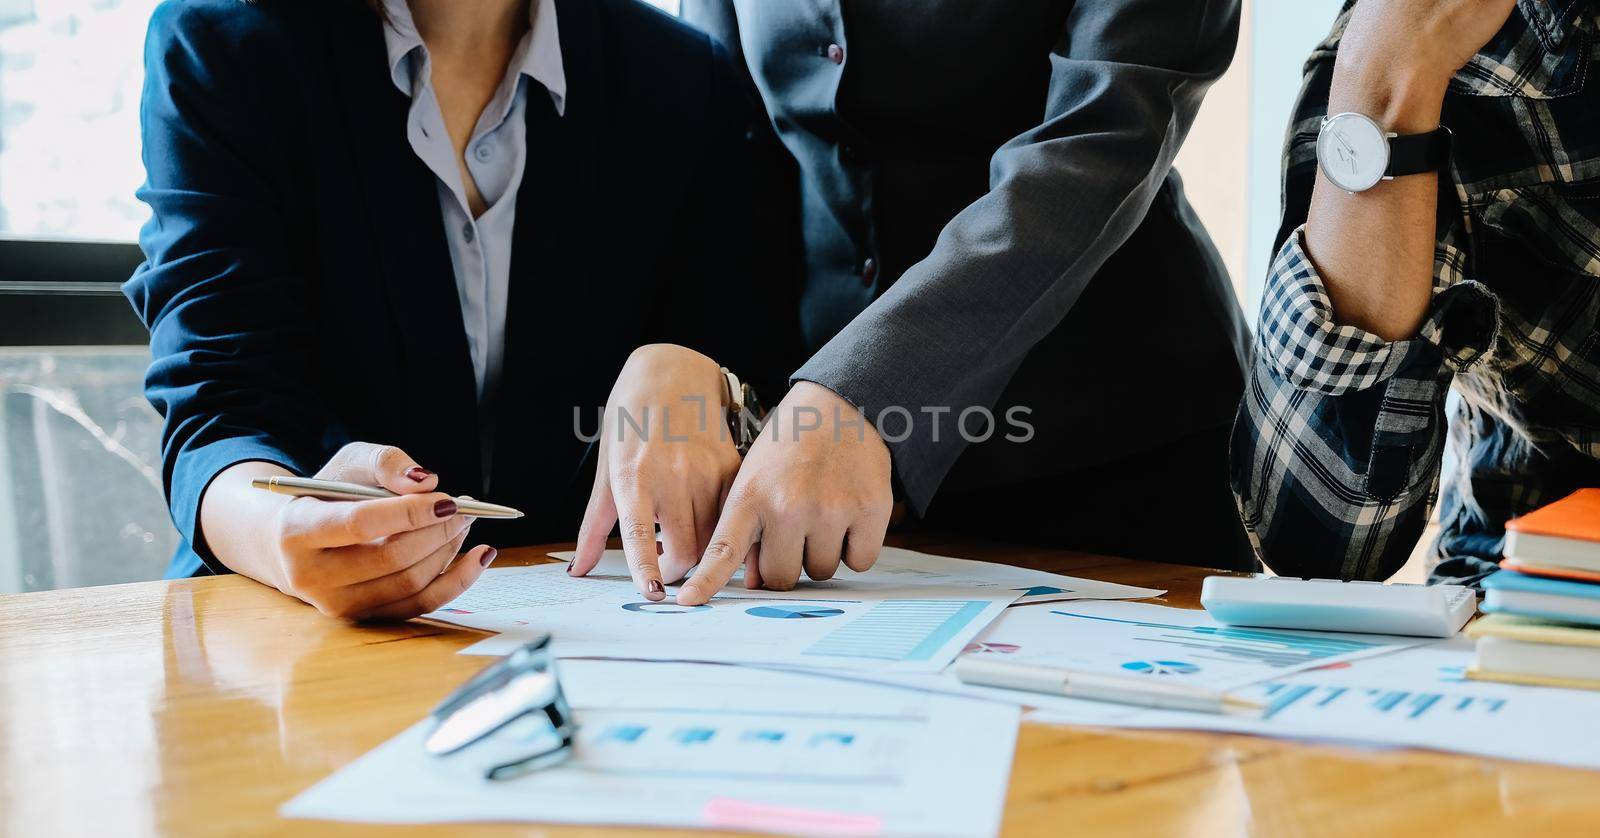 Group of business people busy discussing financial matter during meeting. Corporate Organization Meeting Concept